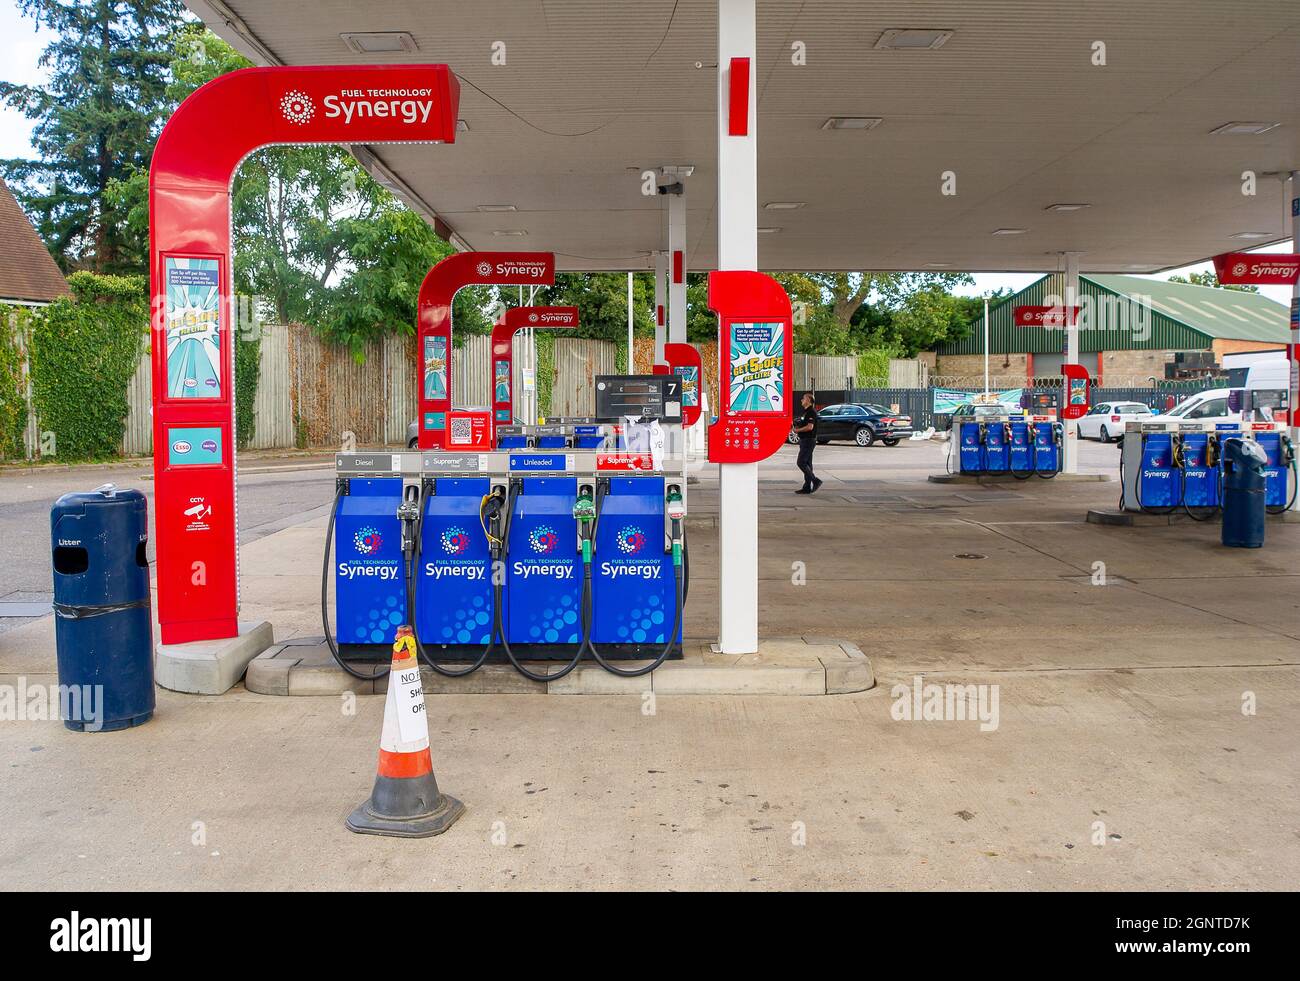 Denham, Buckinghamshire, UK. 27th September, 2021. The Esso petrol station on the A40 Oxford Road in Denham had run out of fuel today. Panic buying of petrol and diesel has continued over the past few days due to a shortage of drivers making fuel deliveries following Brexit and the Covid-19 Pandemic. Credit: Maureen McLean/Alamy Live News Stock Photo